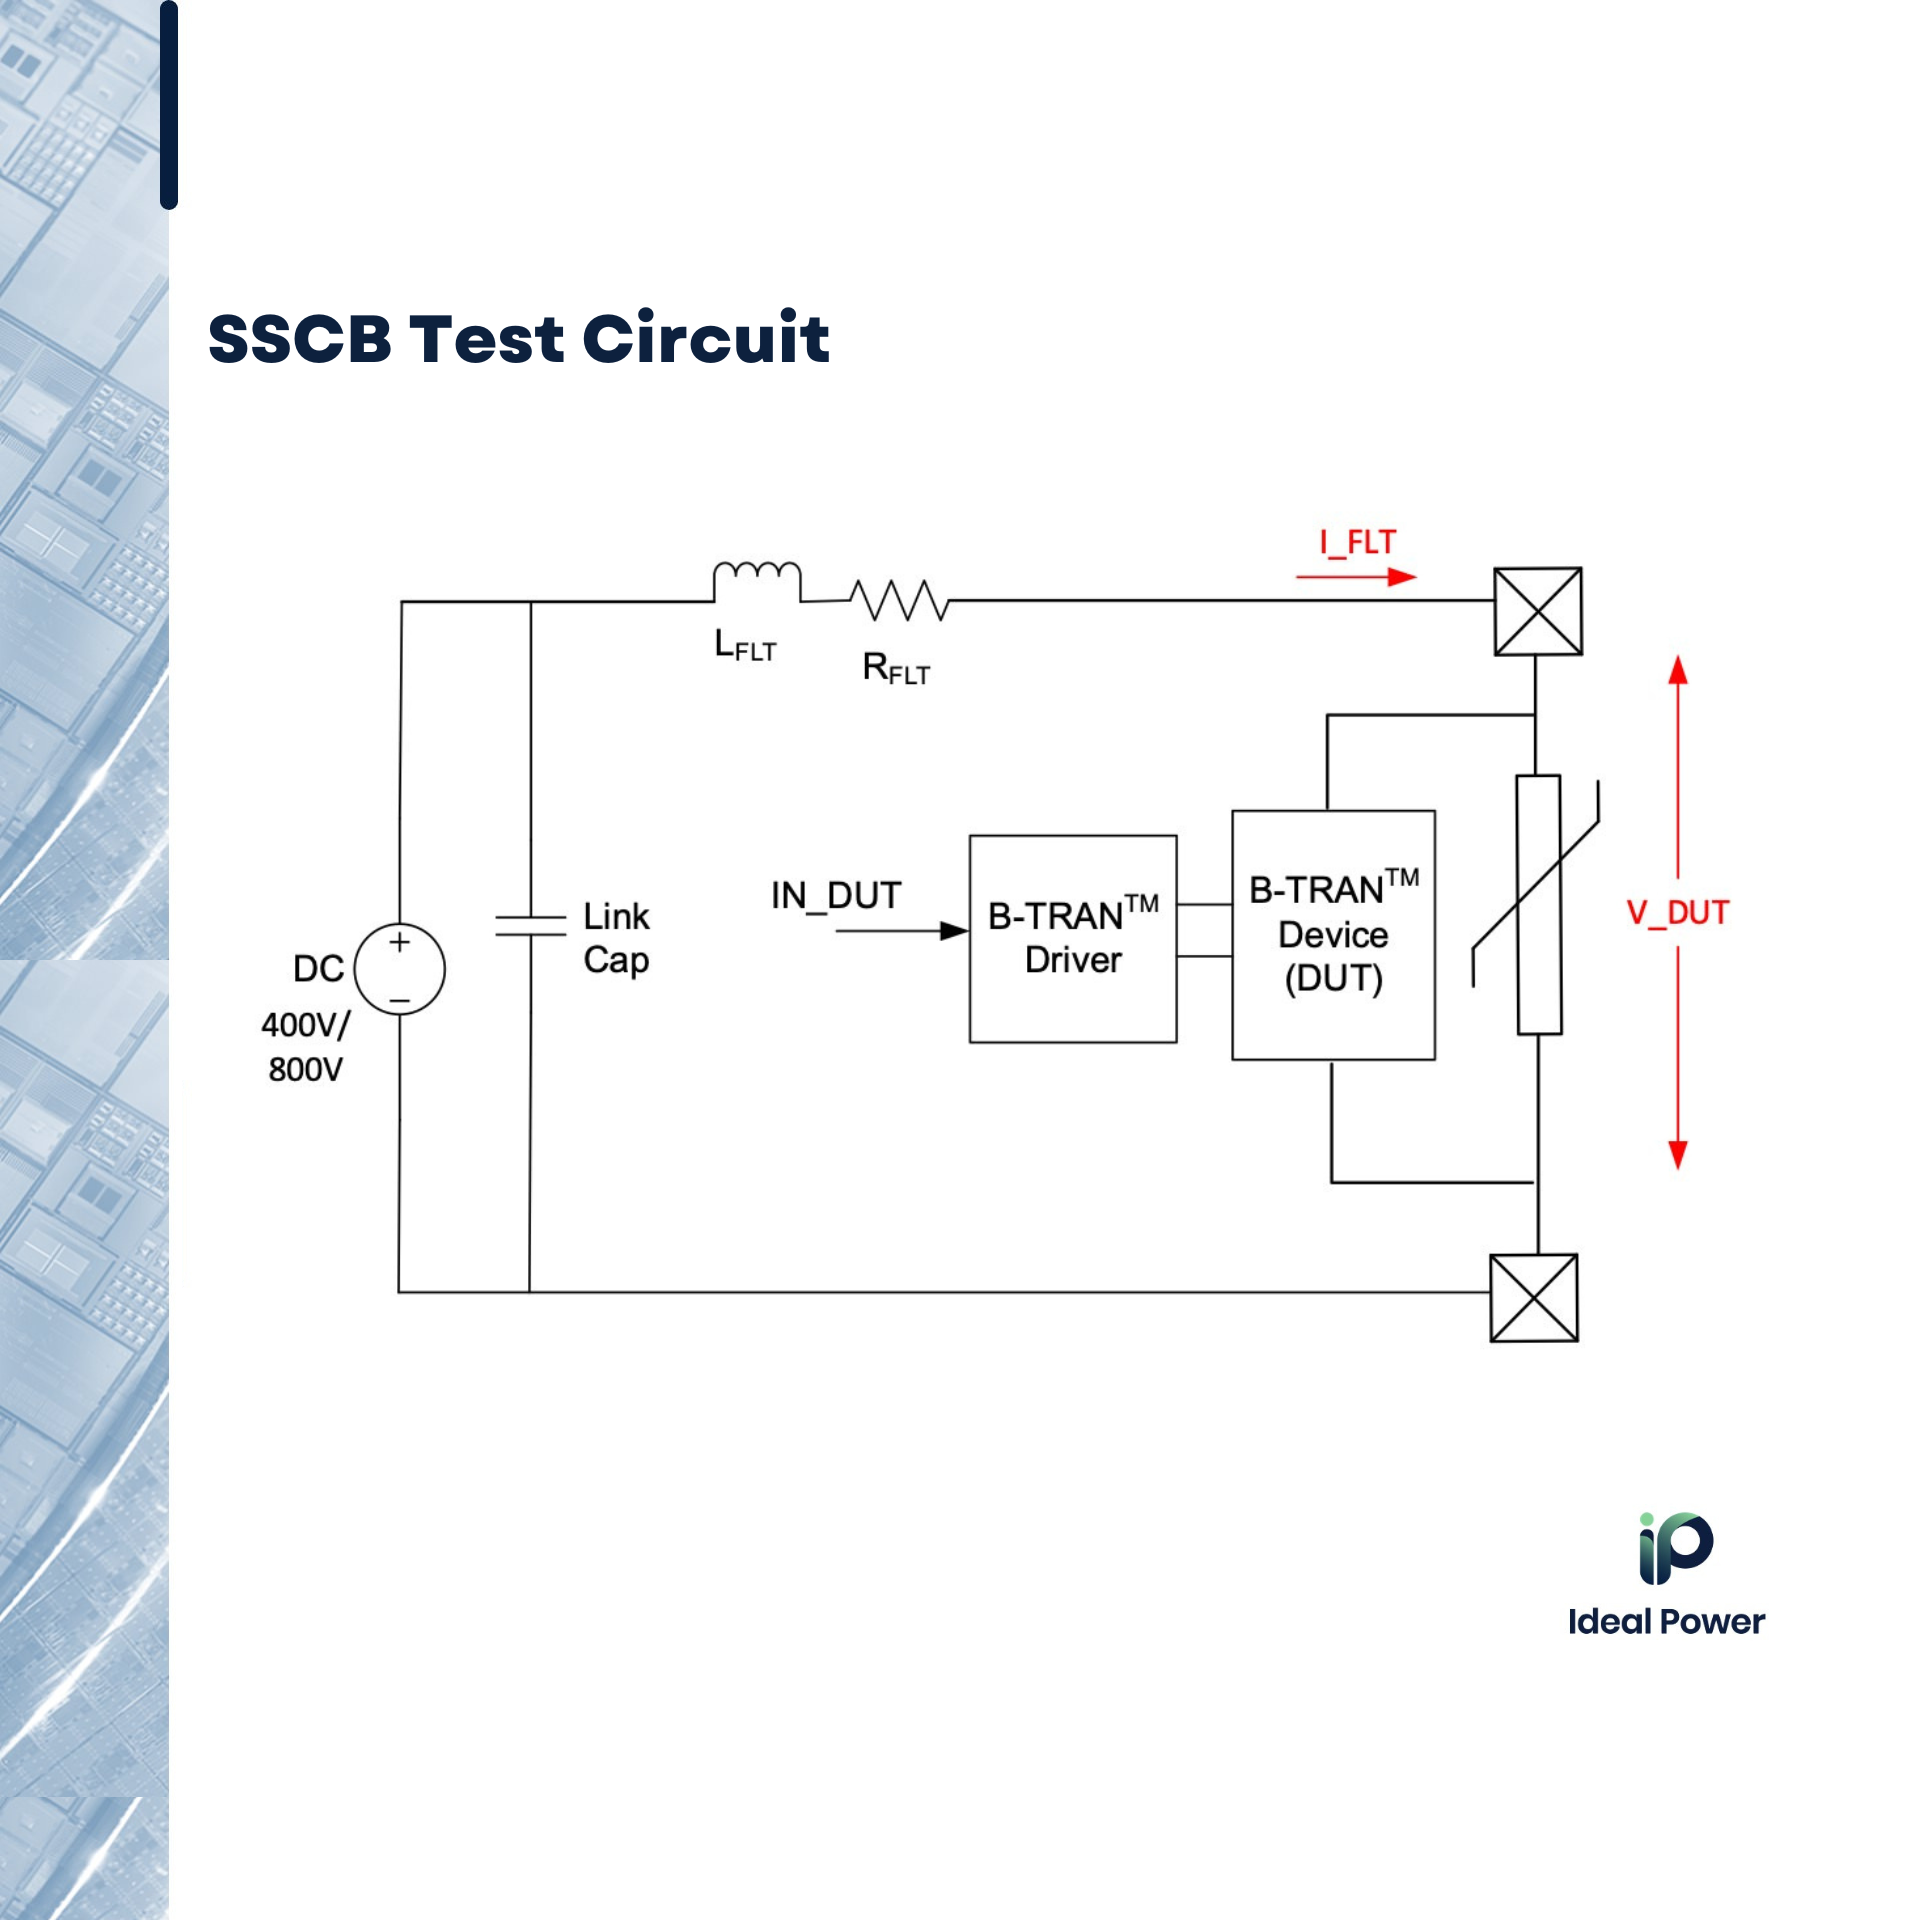 SSCB-Test-Circuit-2.png